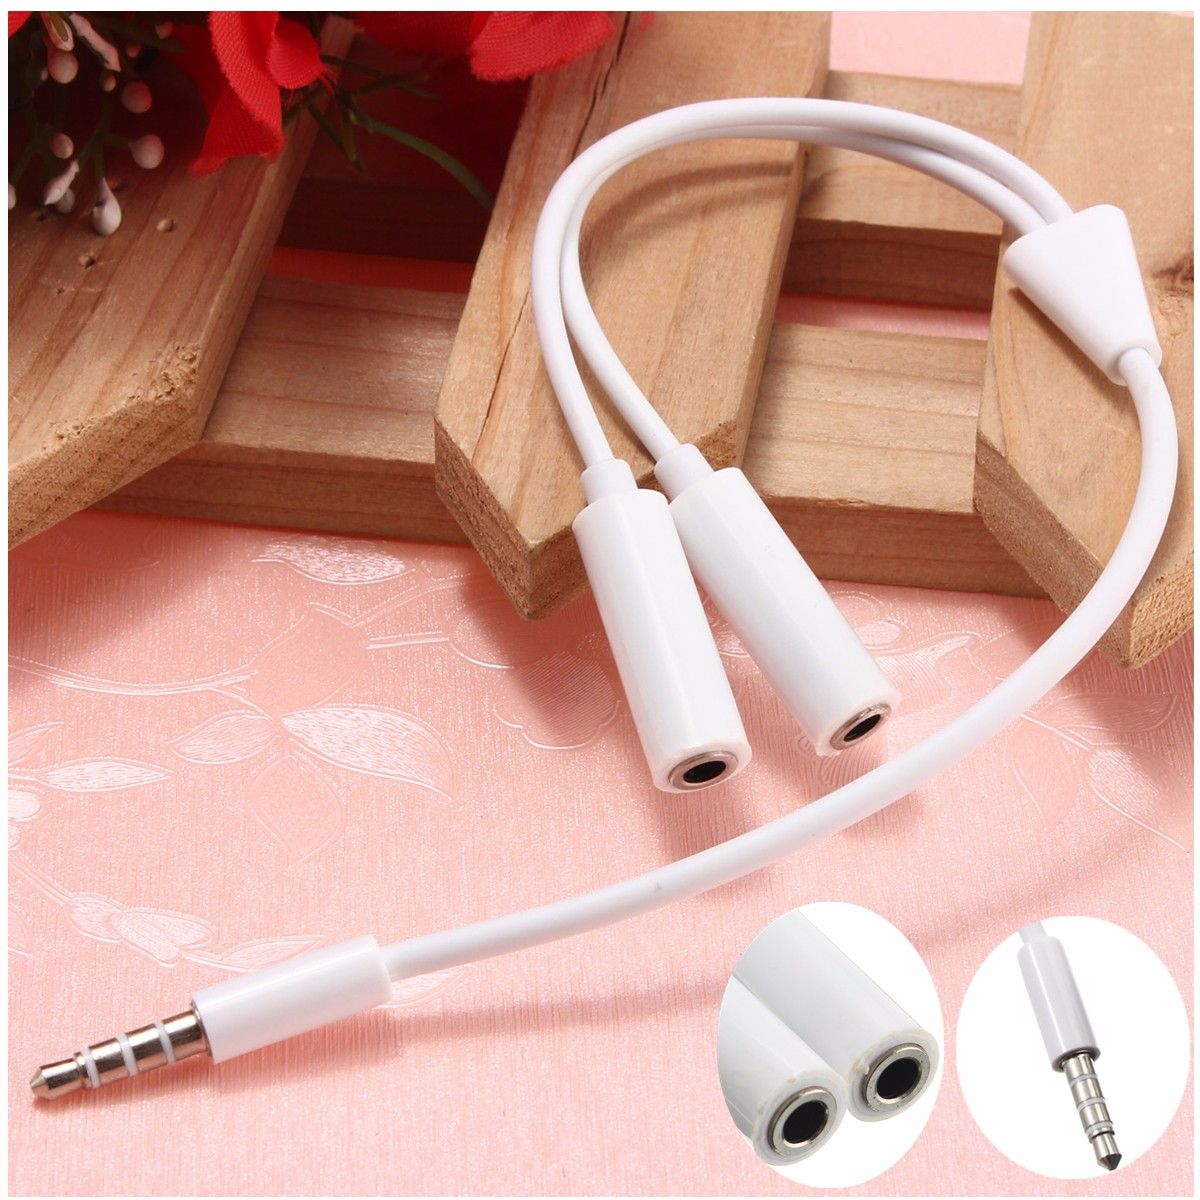 35-mm-Stereo-Plug-Y-Splitter-1-Male-to-2-Female-Audio-Cable-for-Earphone-Headset-Headphone-MP3-MP4-C-1546741